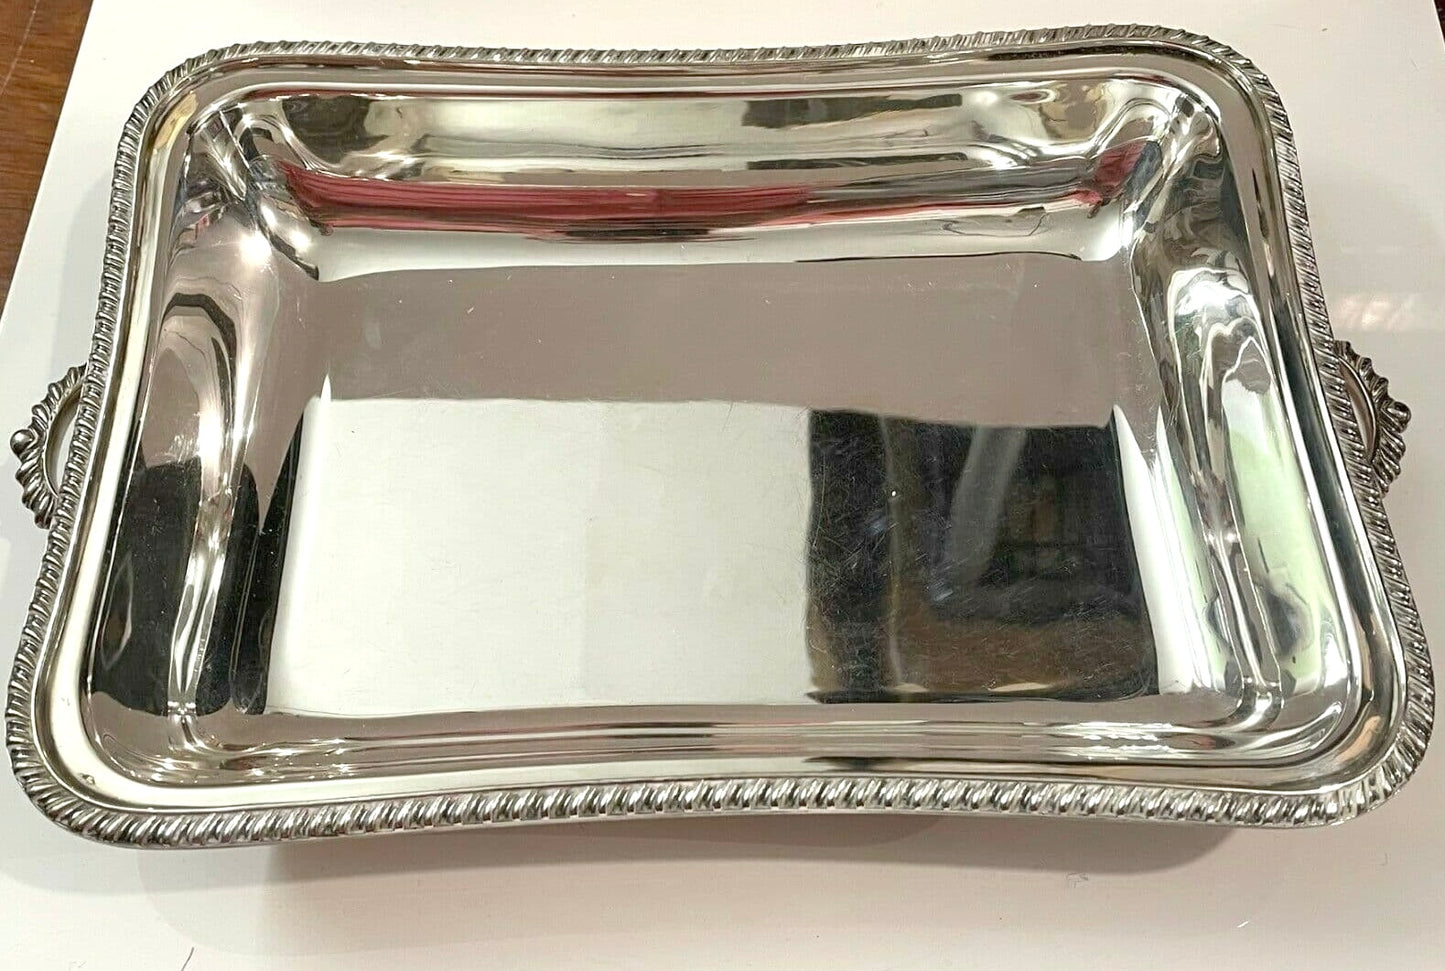 Silver plated serving tray with handles 10.5 inches x 7.5 inches - Pre Loved